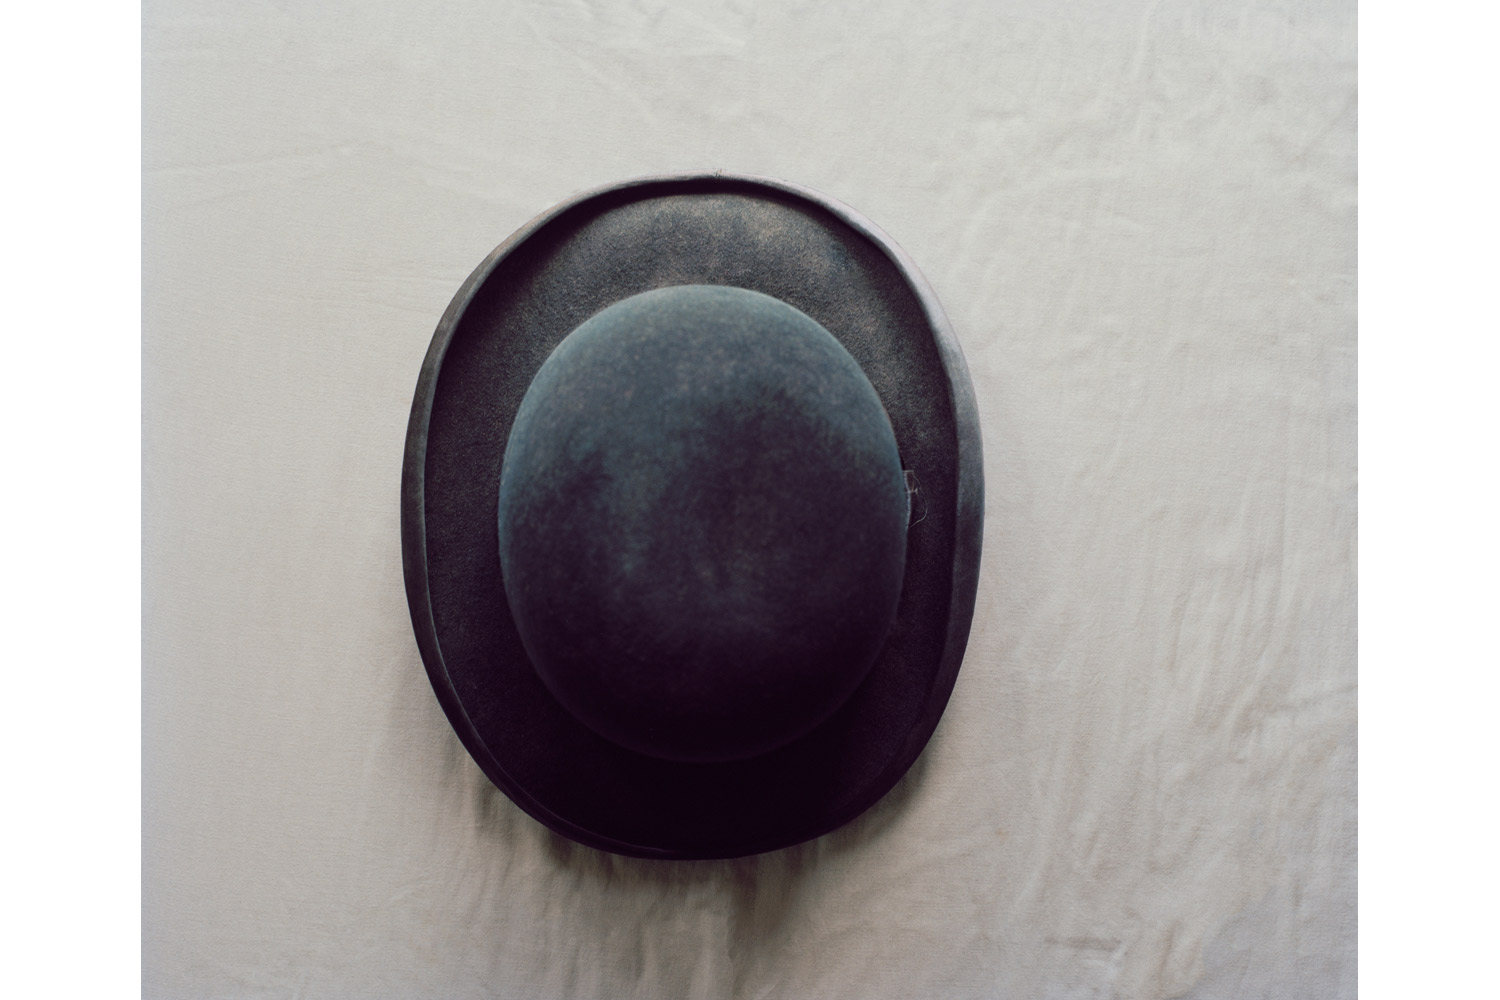 A bowler hat, as worn by Butch Cassidy.